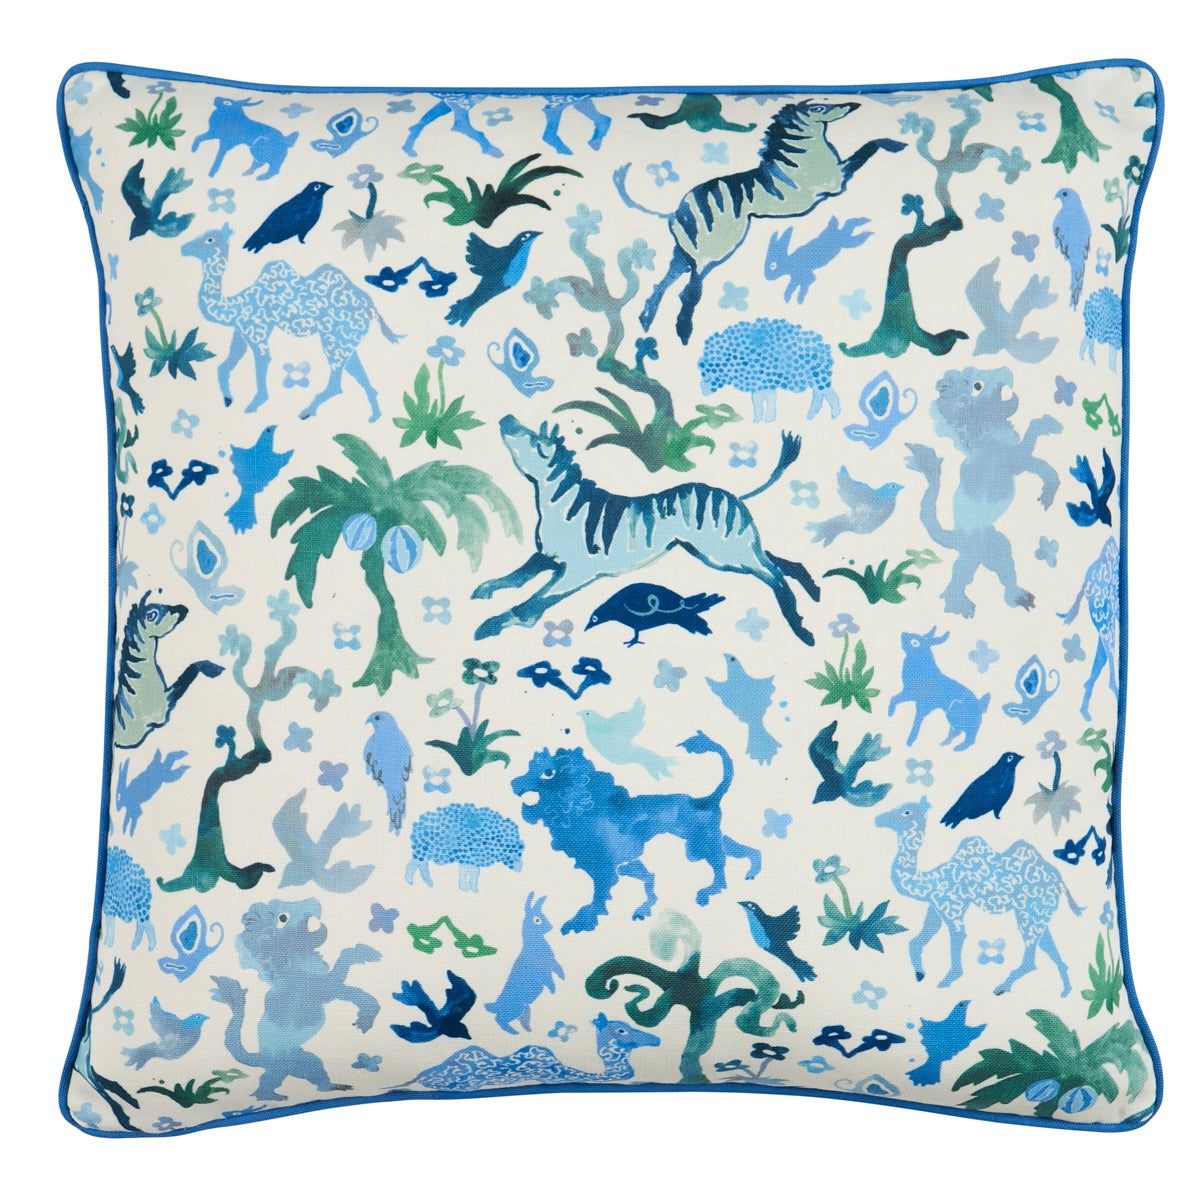 Beasts Pillow in Blue and Green, 22" For Sale